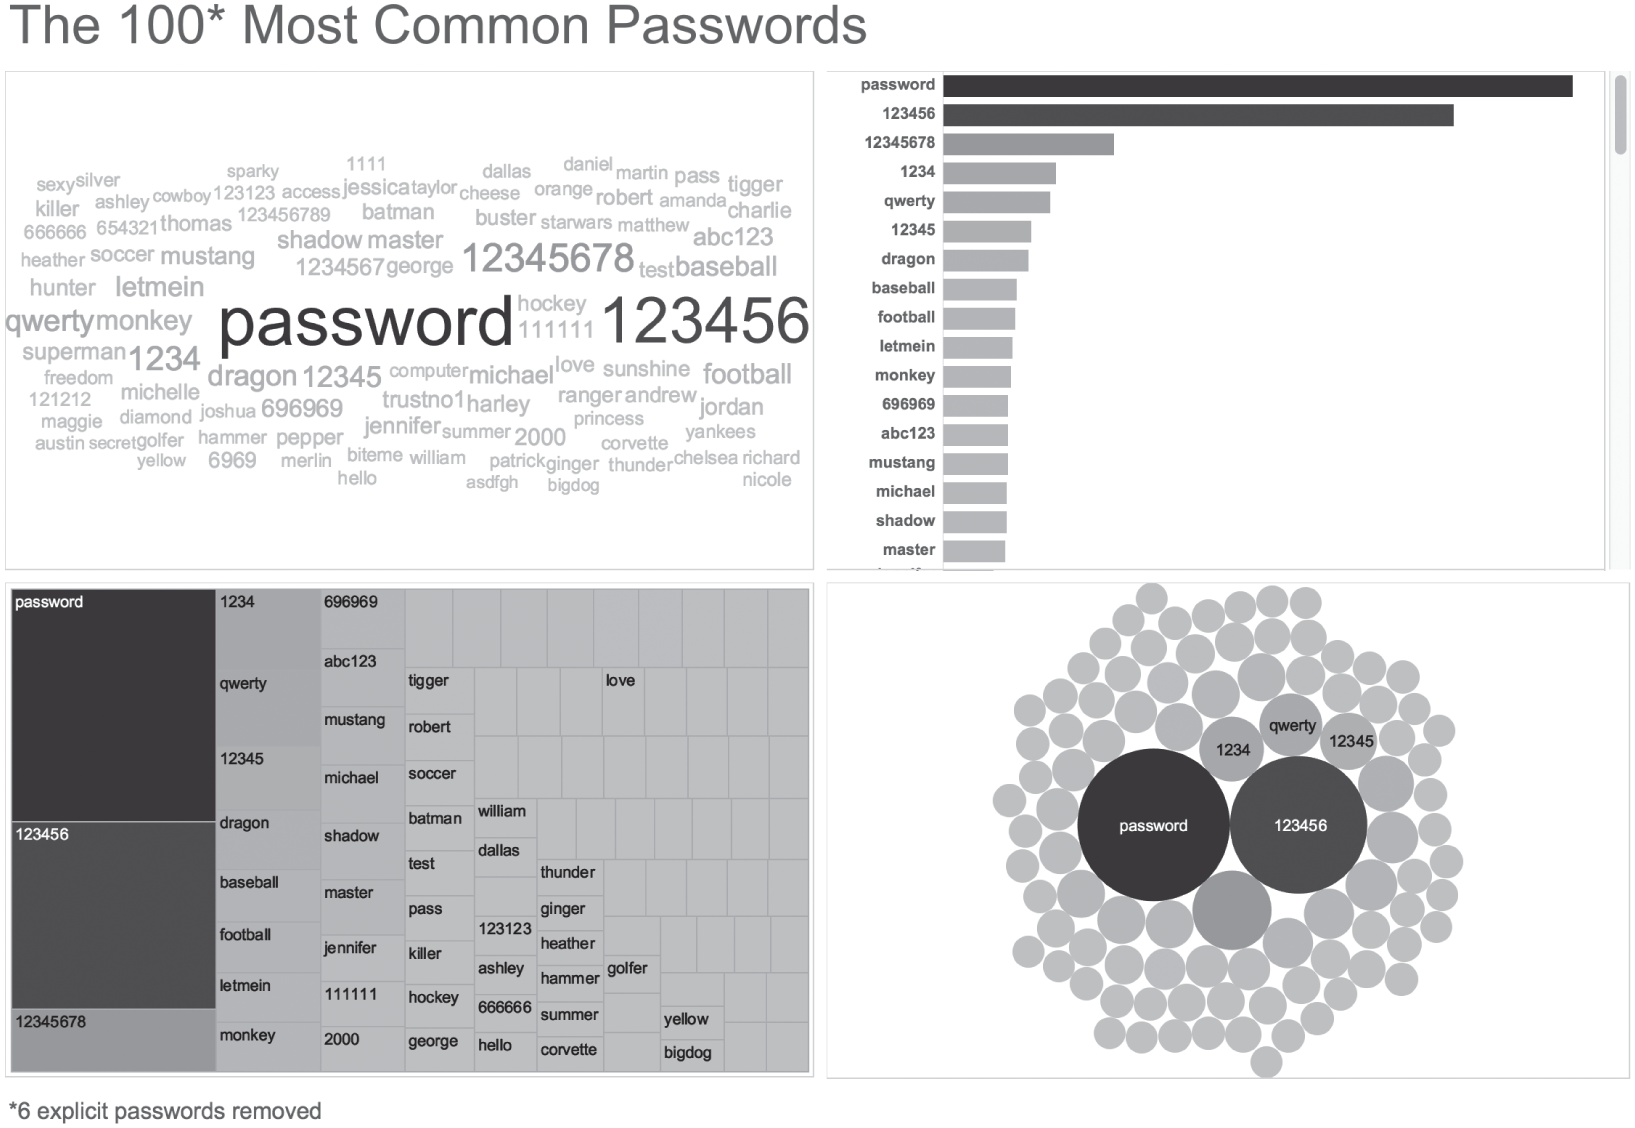 Illustration of four different ways depicting the 100 most common passwords - a bar chart, a treemap, or a packed bubble over a word cloud.